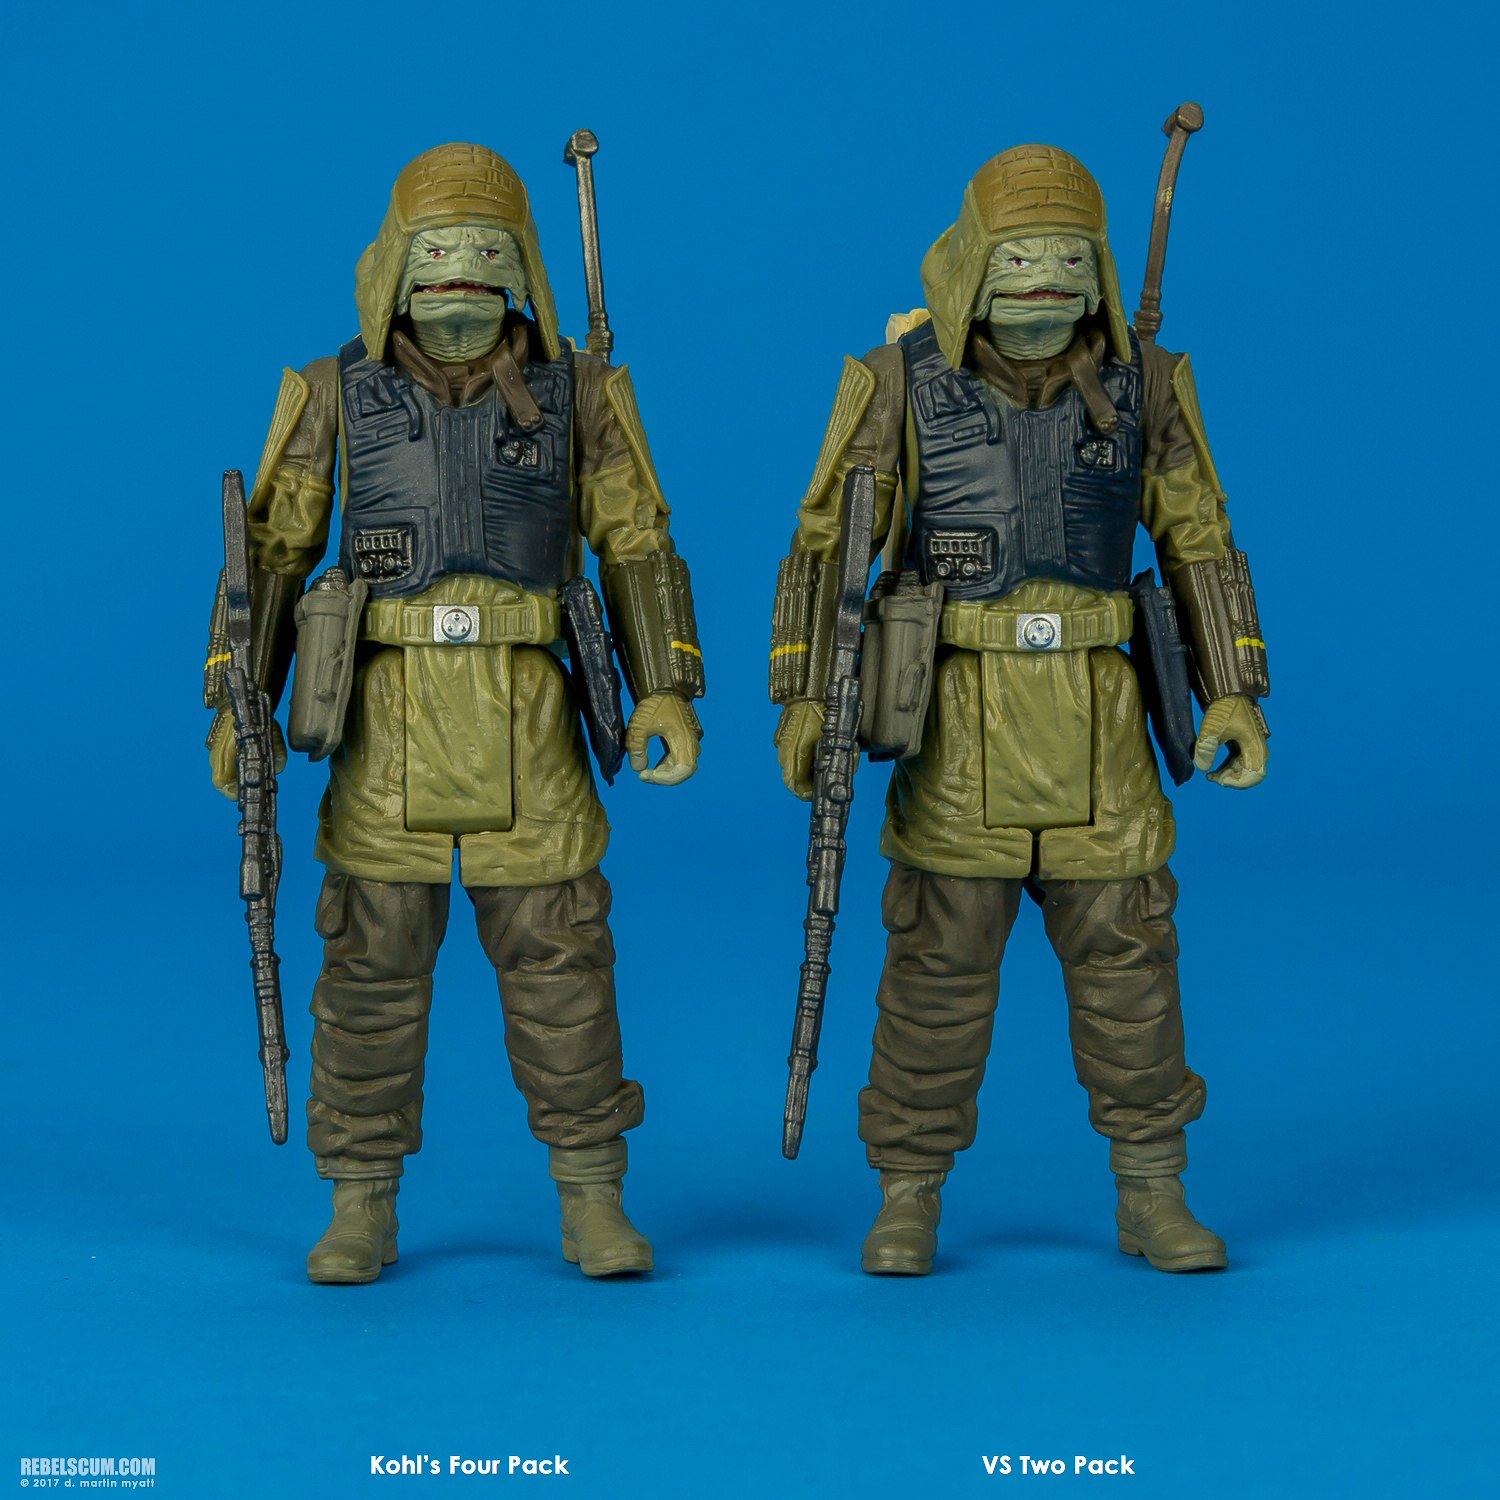 Kohls-Exclusive-Four-Pack-Rogue-One-B9605-029.jpg